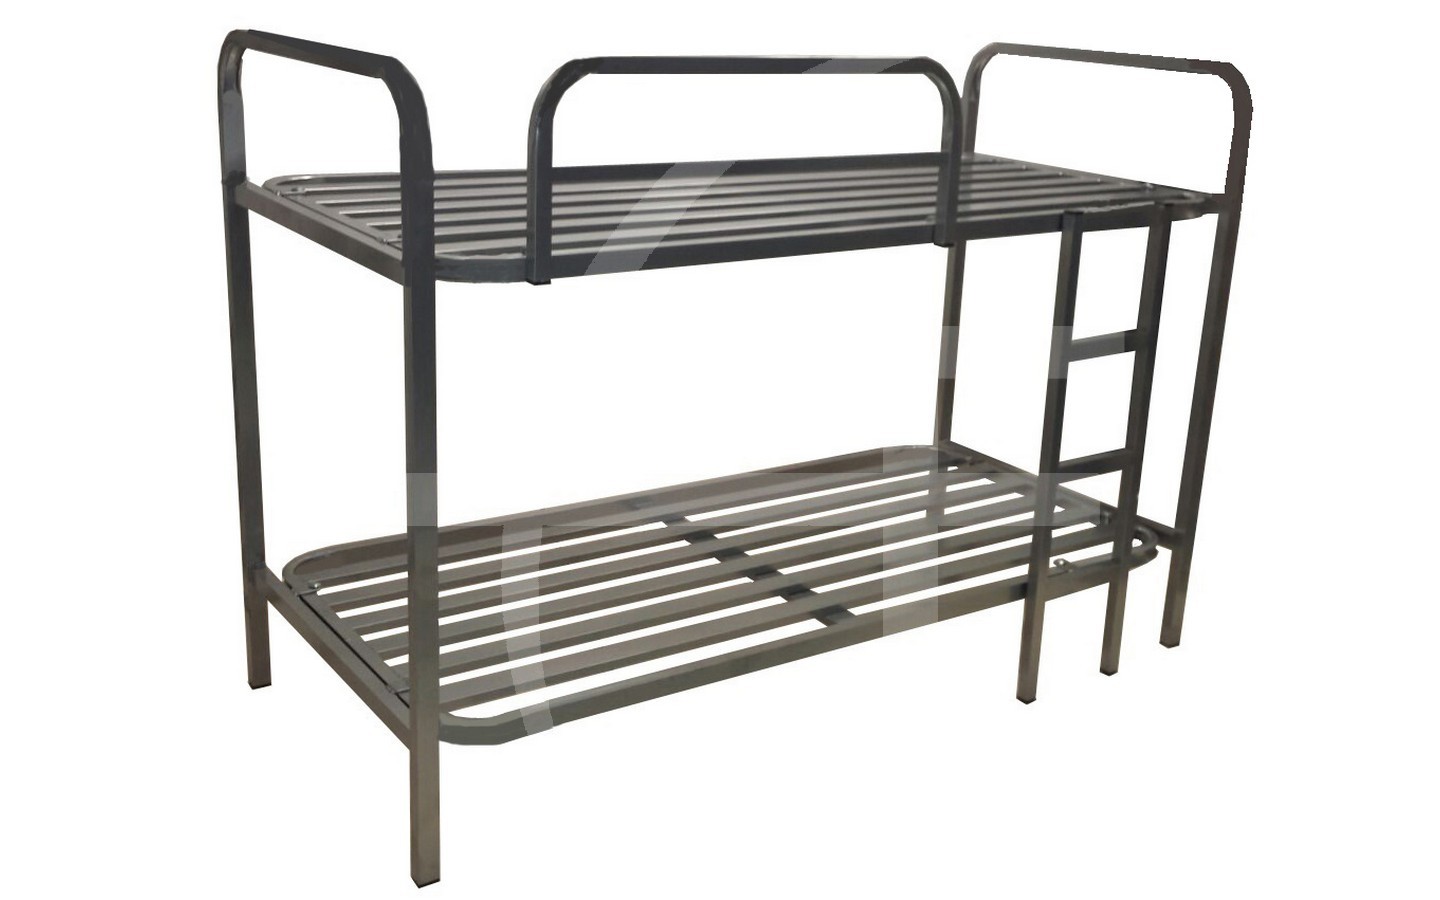 Bunk Beds For S Steel, Military Metal Bunk Beds